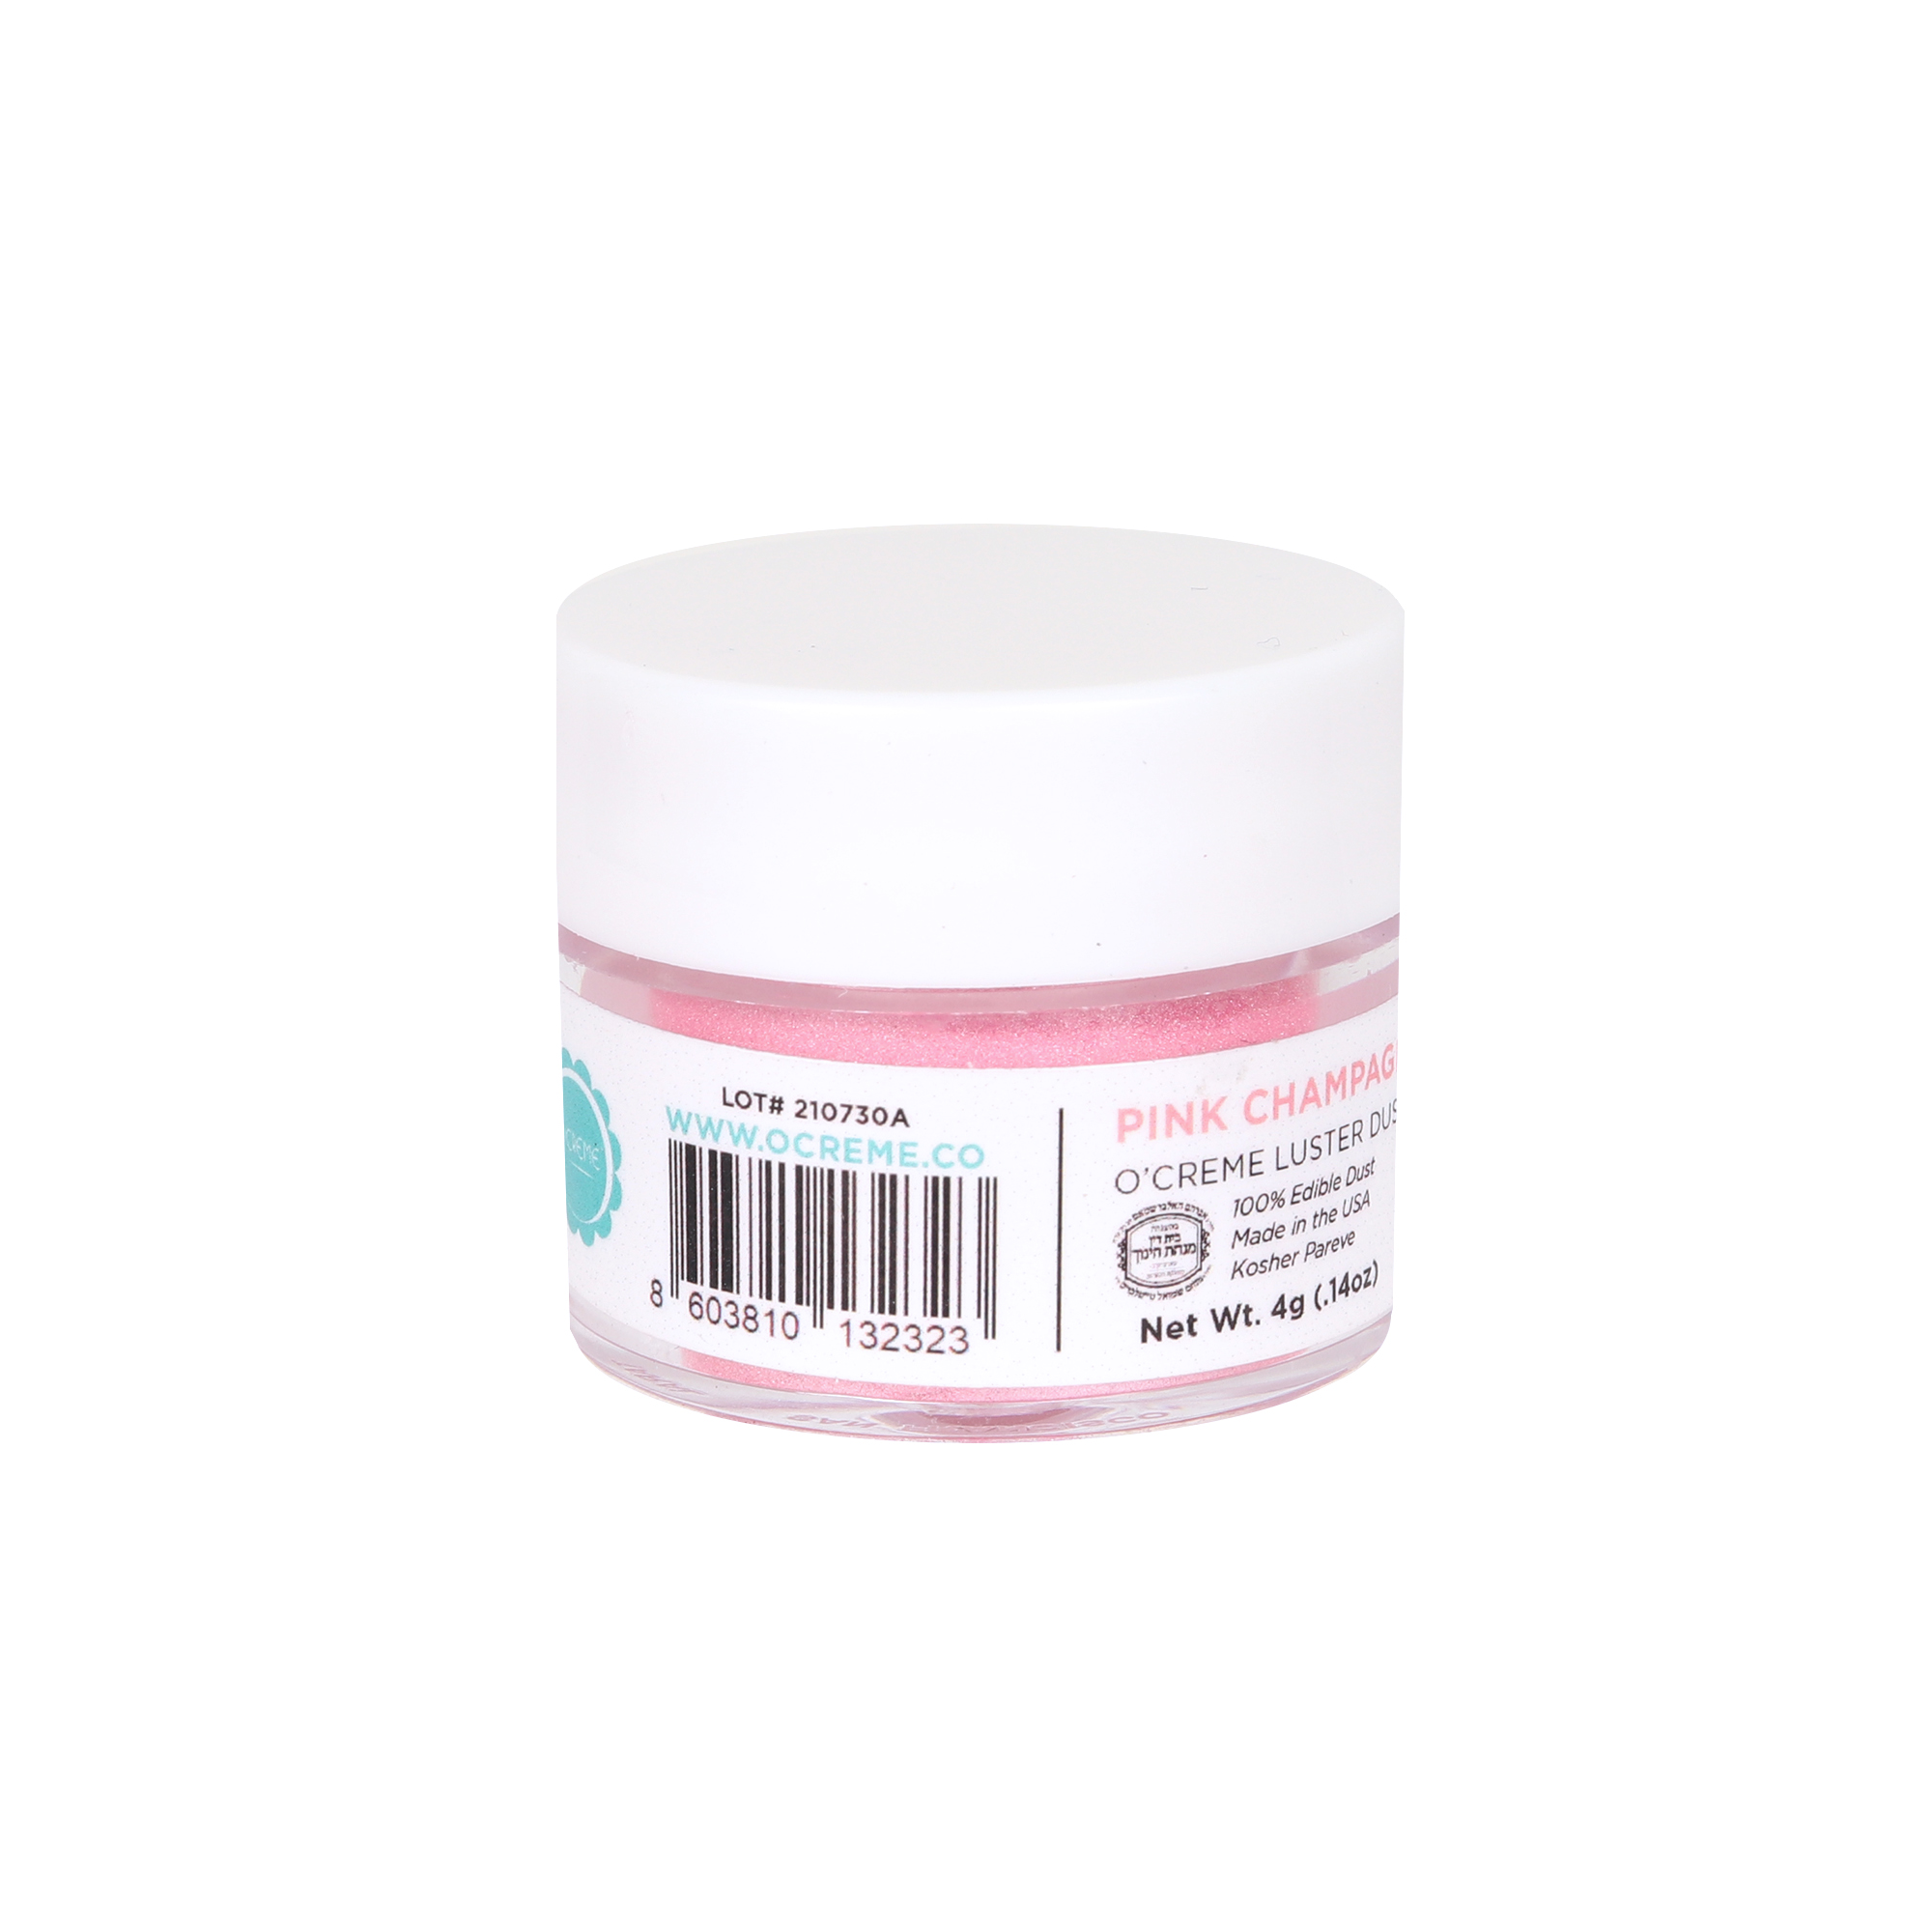 O'Creme Pink Champagne Luster Dust, 4 gr. image 1